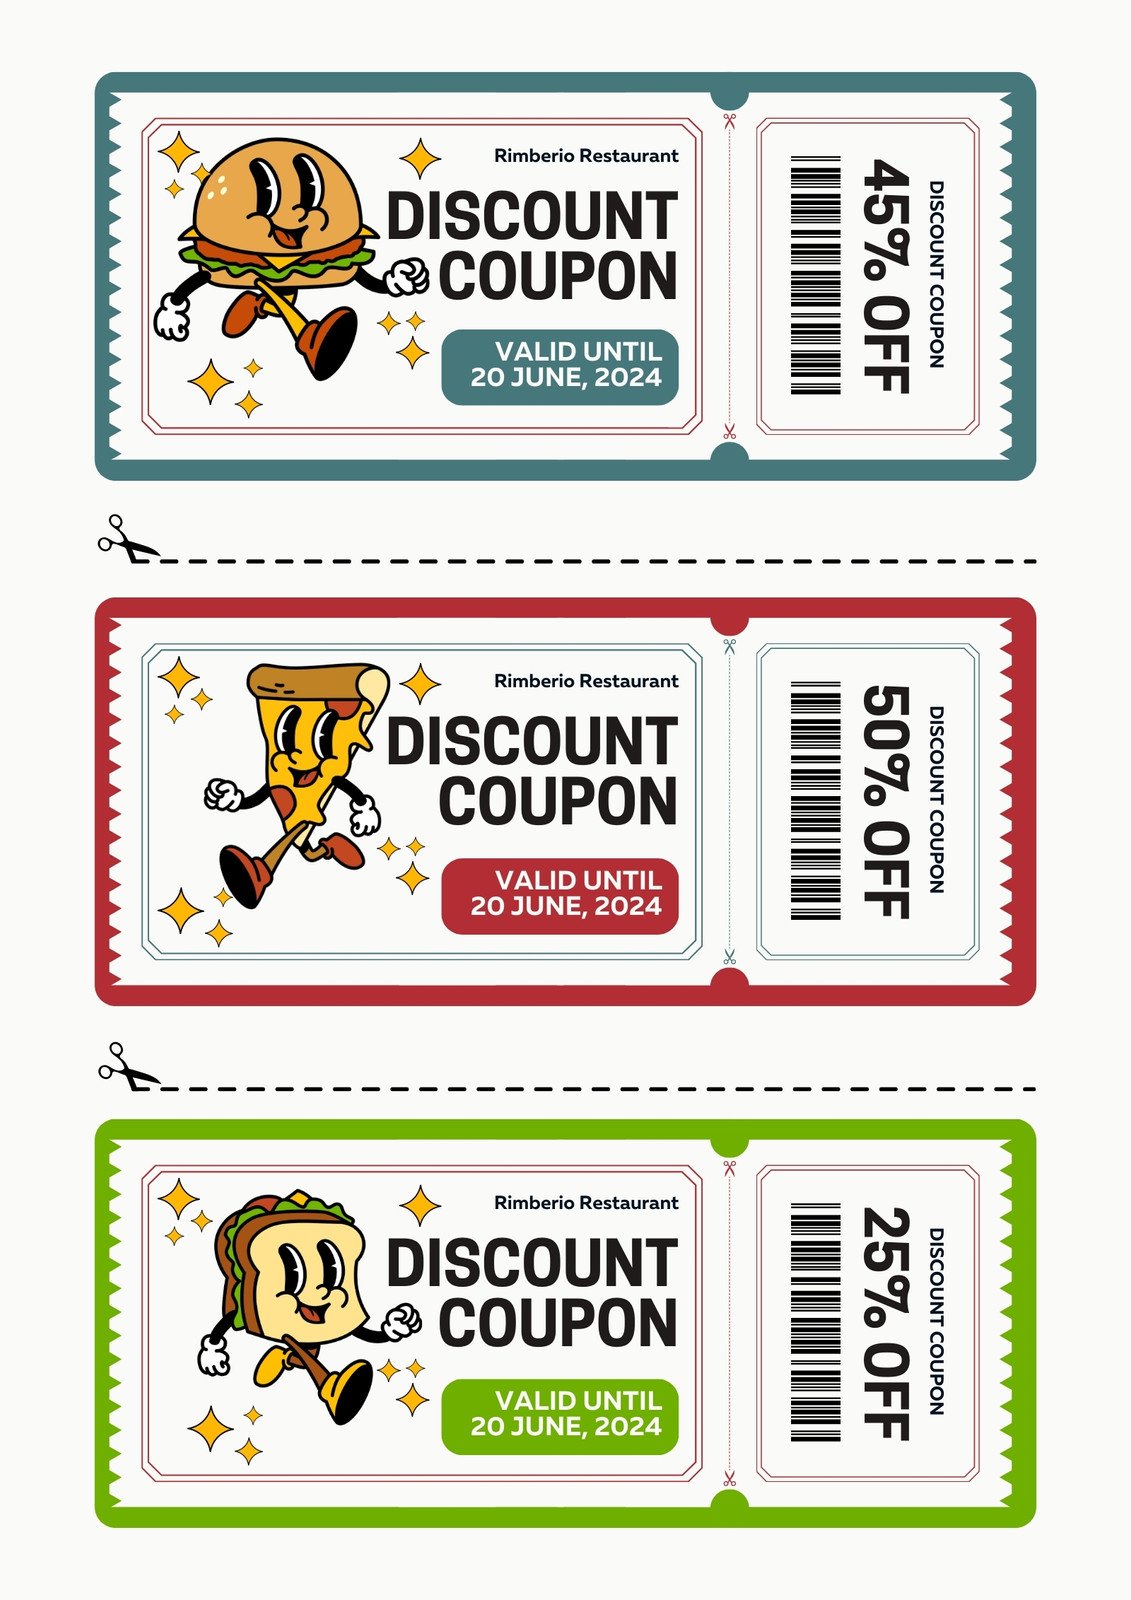 Wallet-friendly food coupons